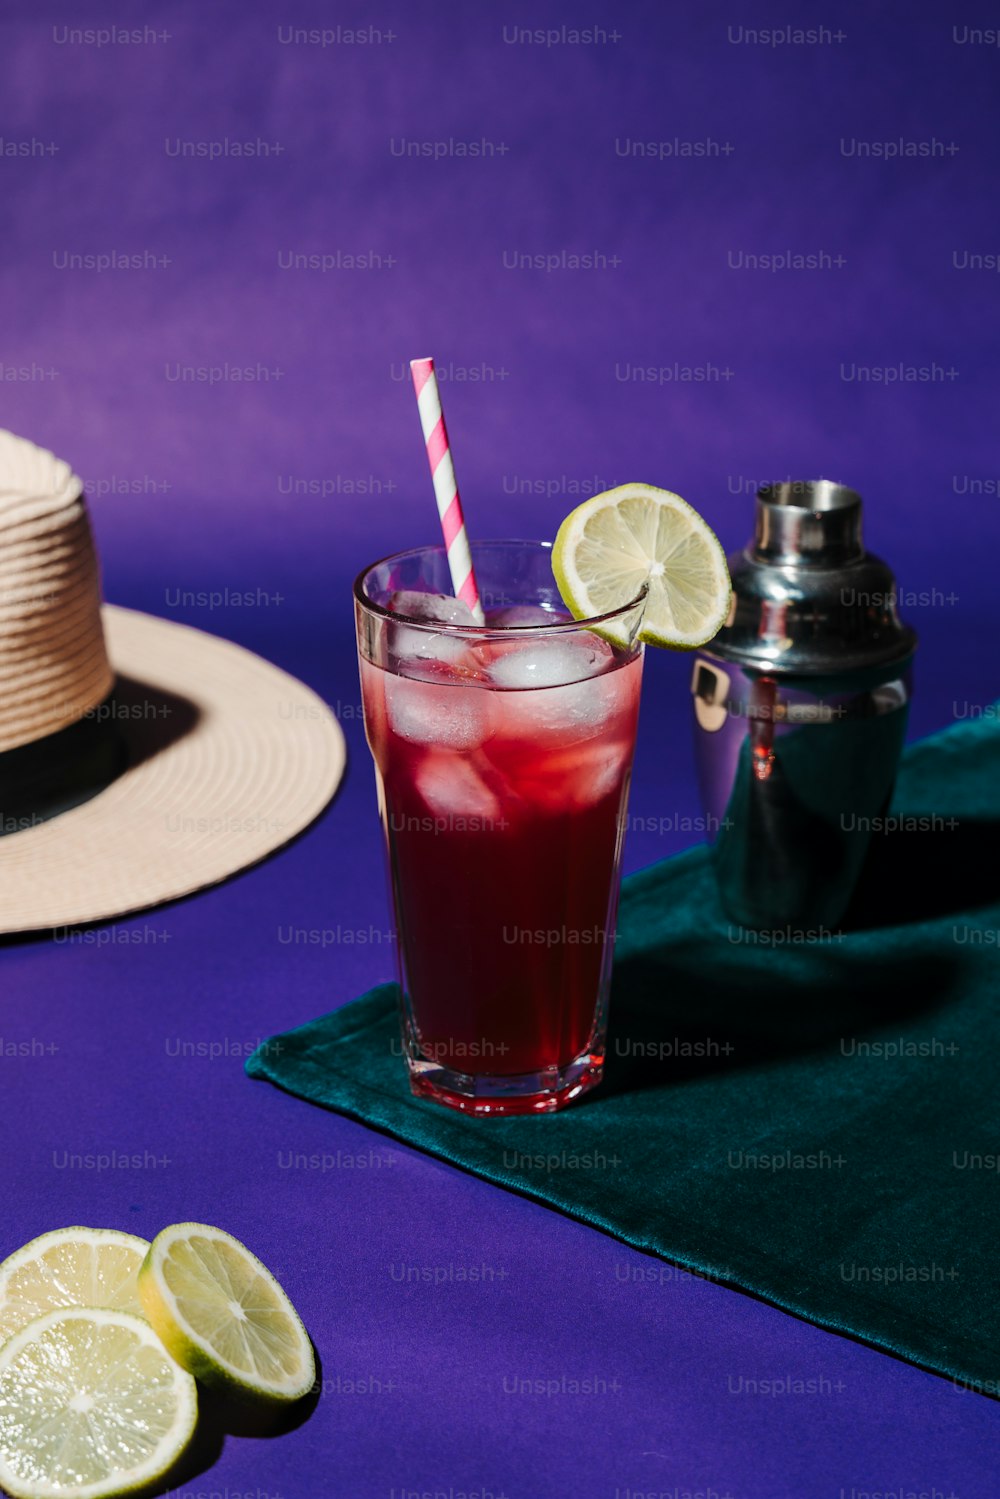 a drink with a straw and a straw hat next to it